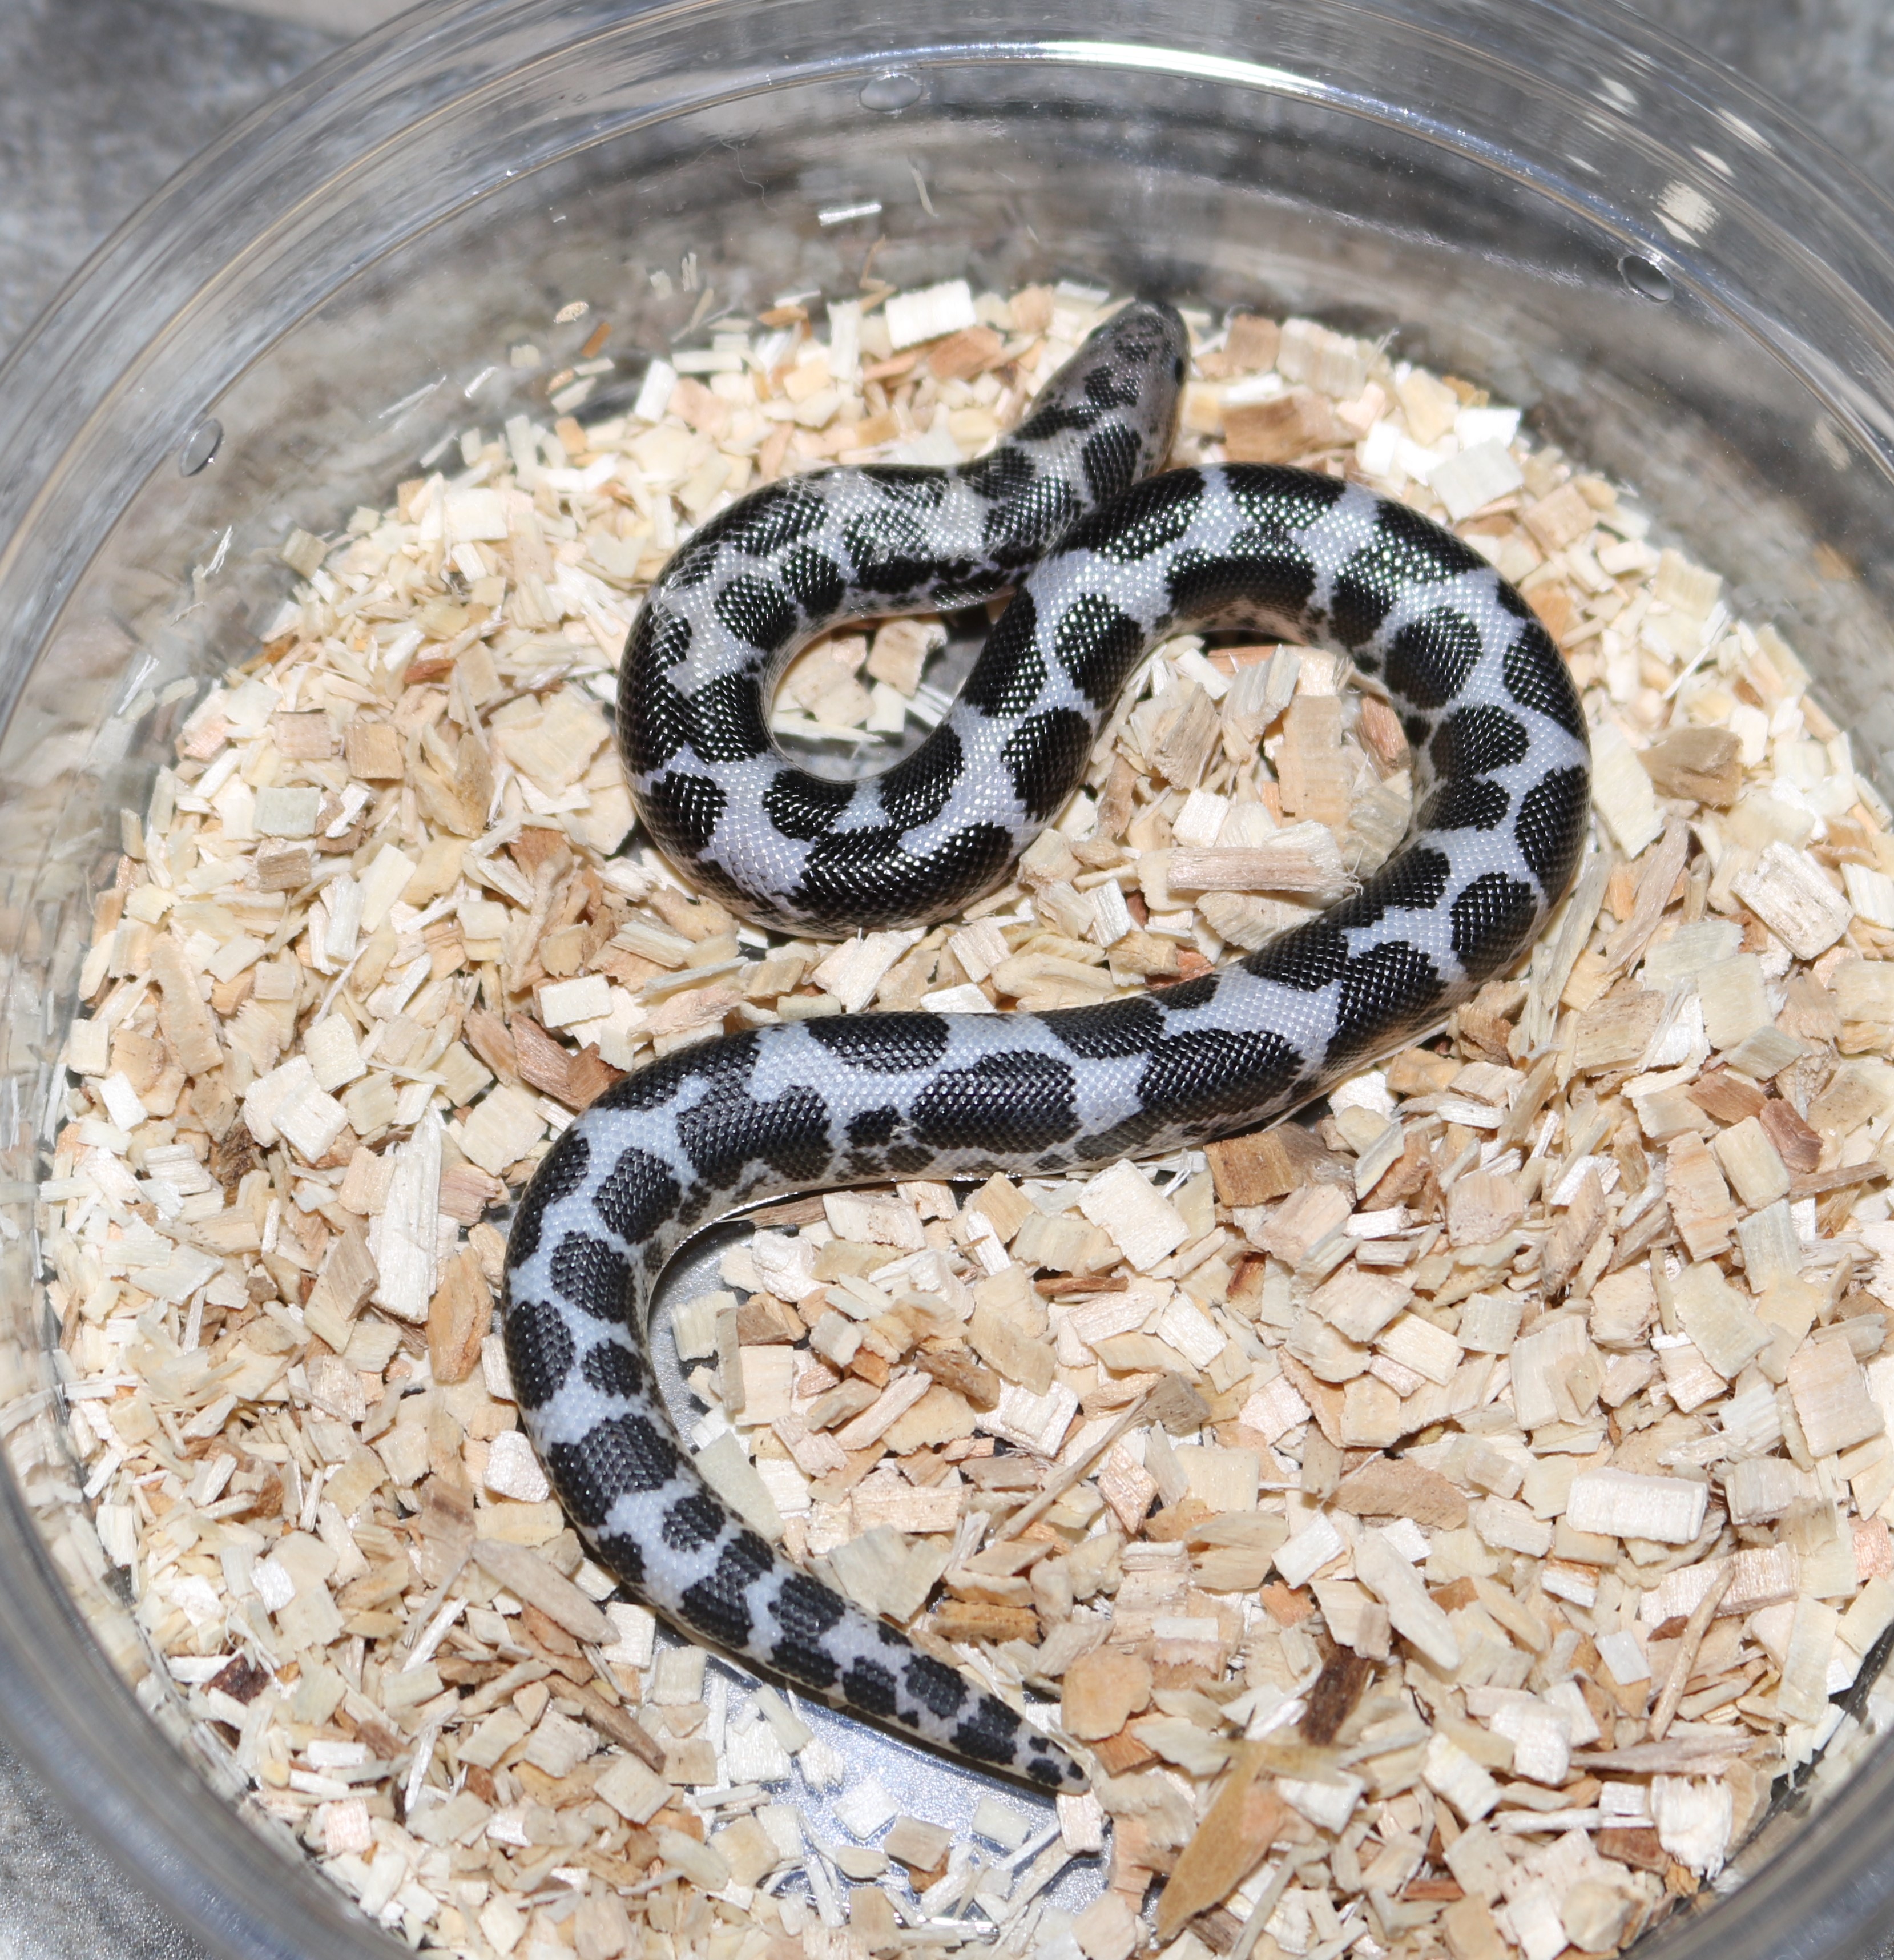 Anery Sand Boa by Wards World Of Reptile Propagation